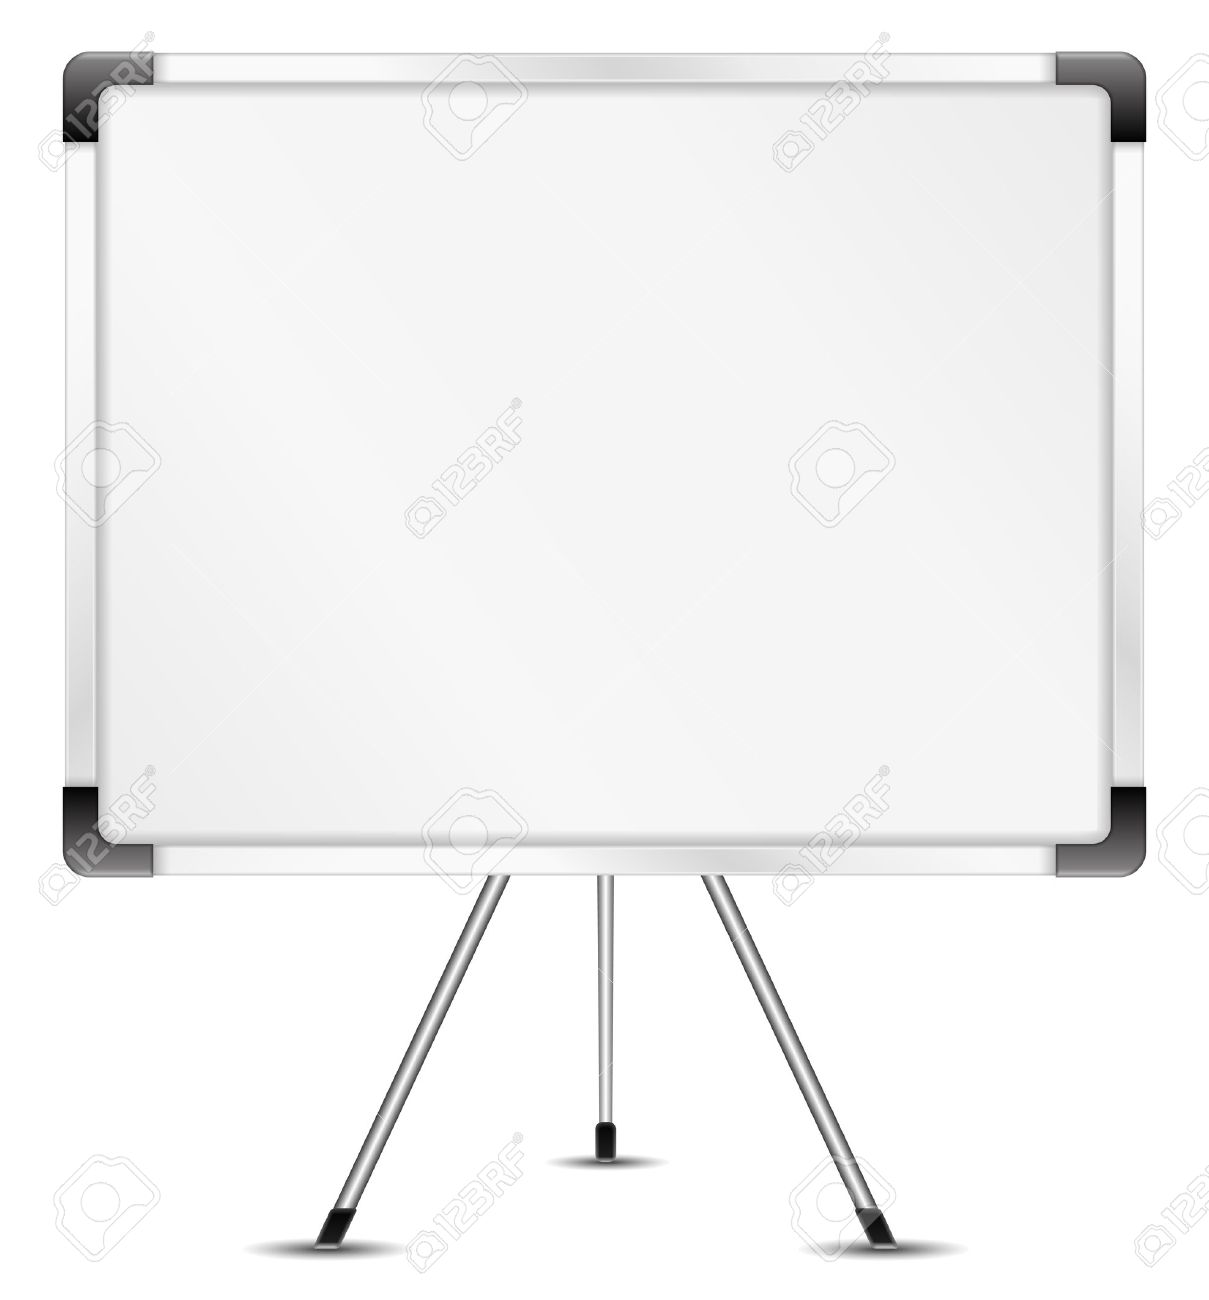 Blackboard clipart whiteboard easel pencil and in color jpg